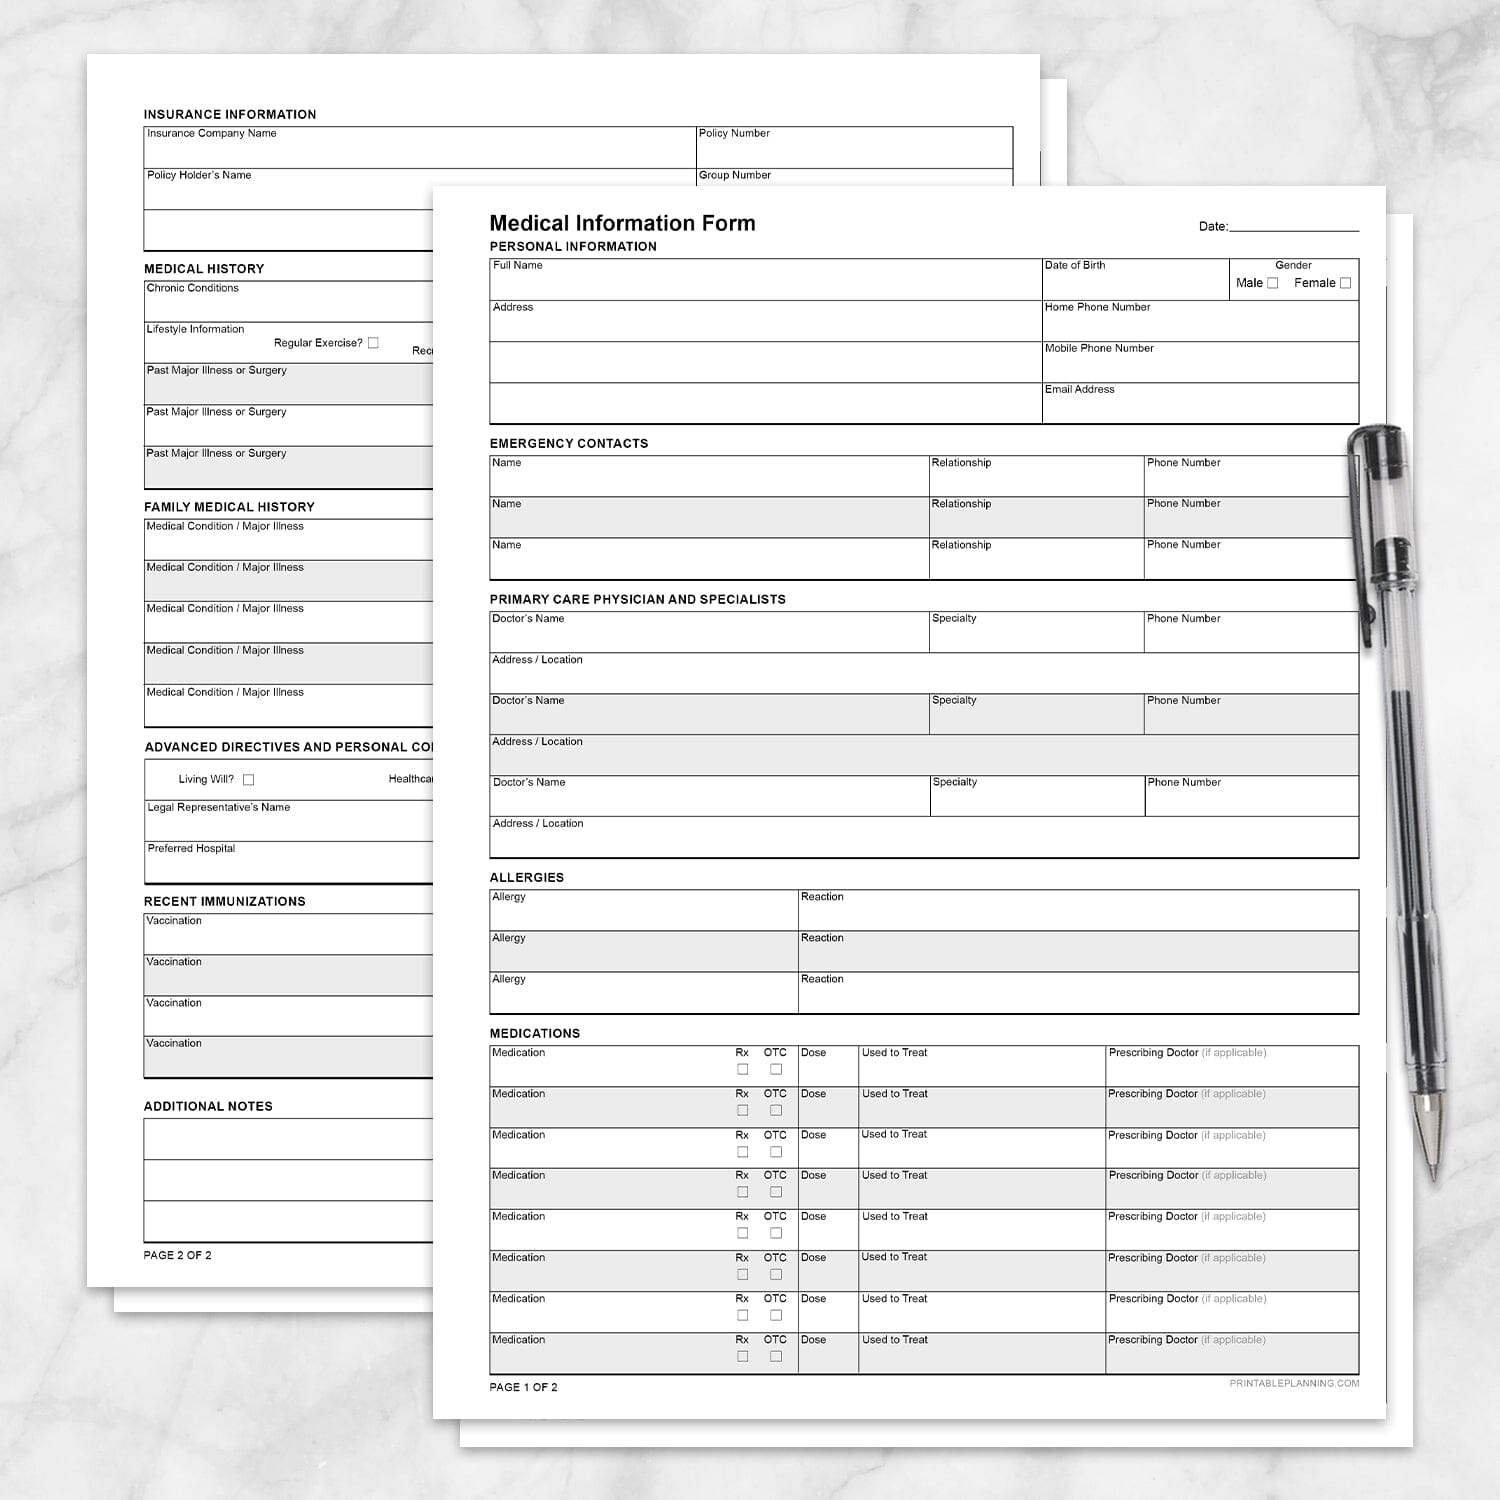 Printable Medical Information Form at Printable Planning. A comprehensive 2-page medical information form that you print yourself.